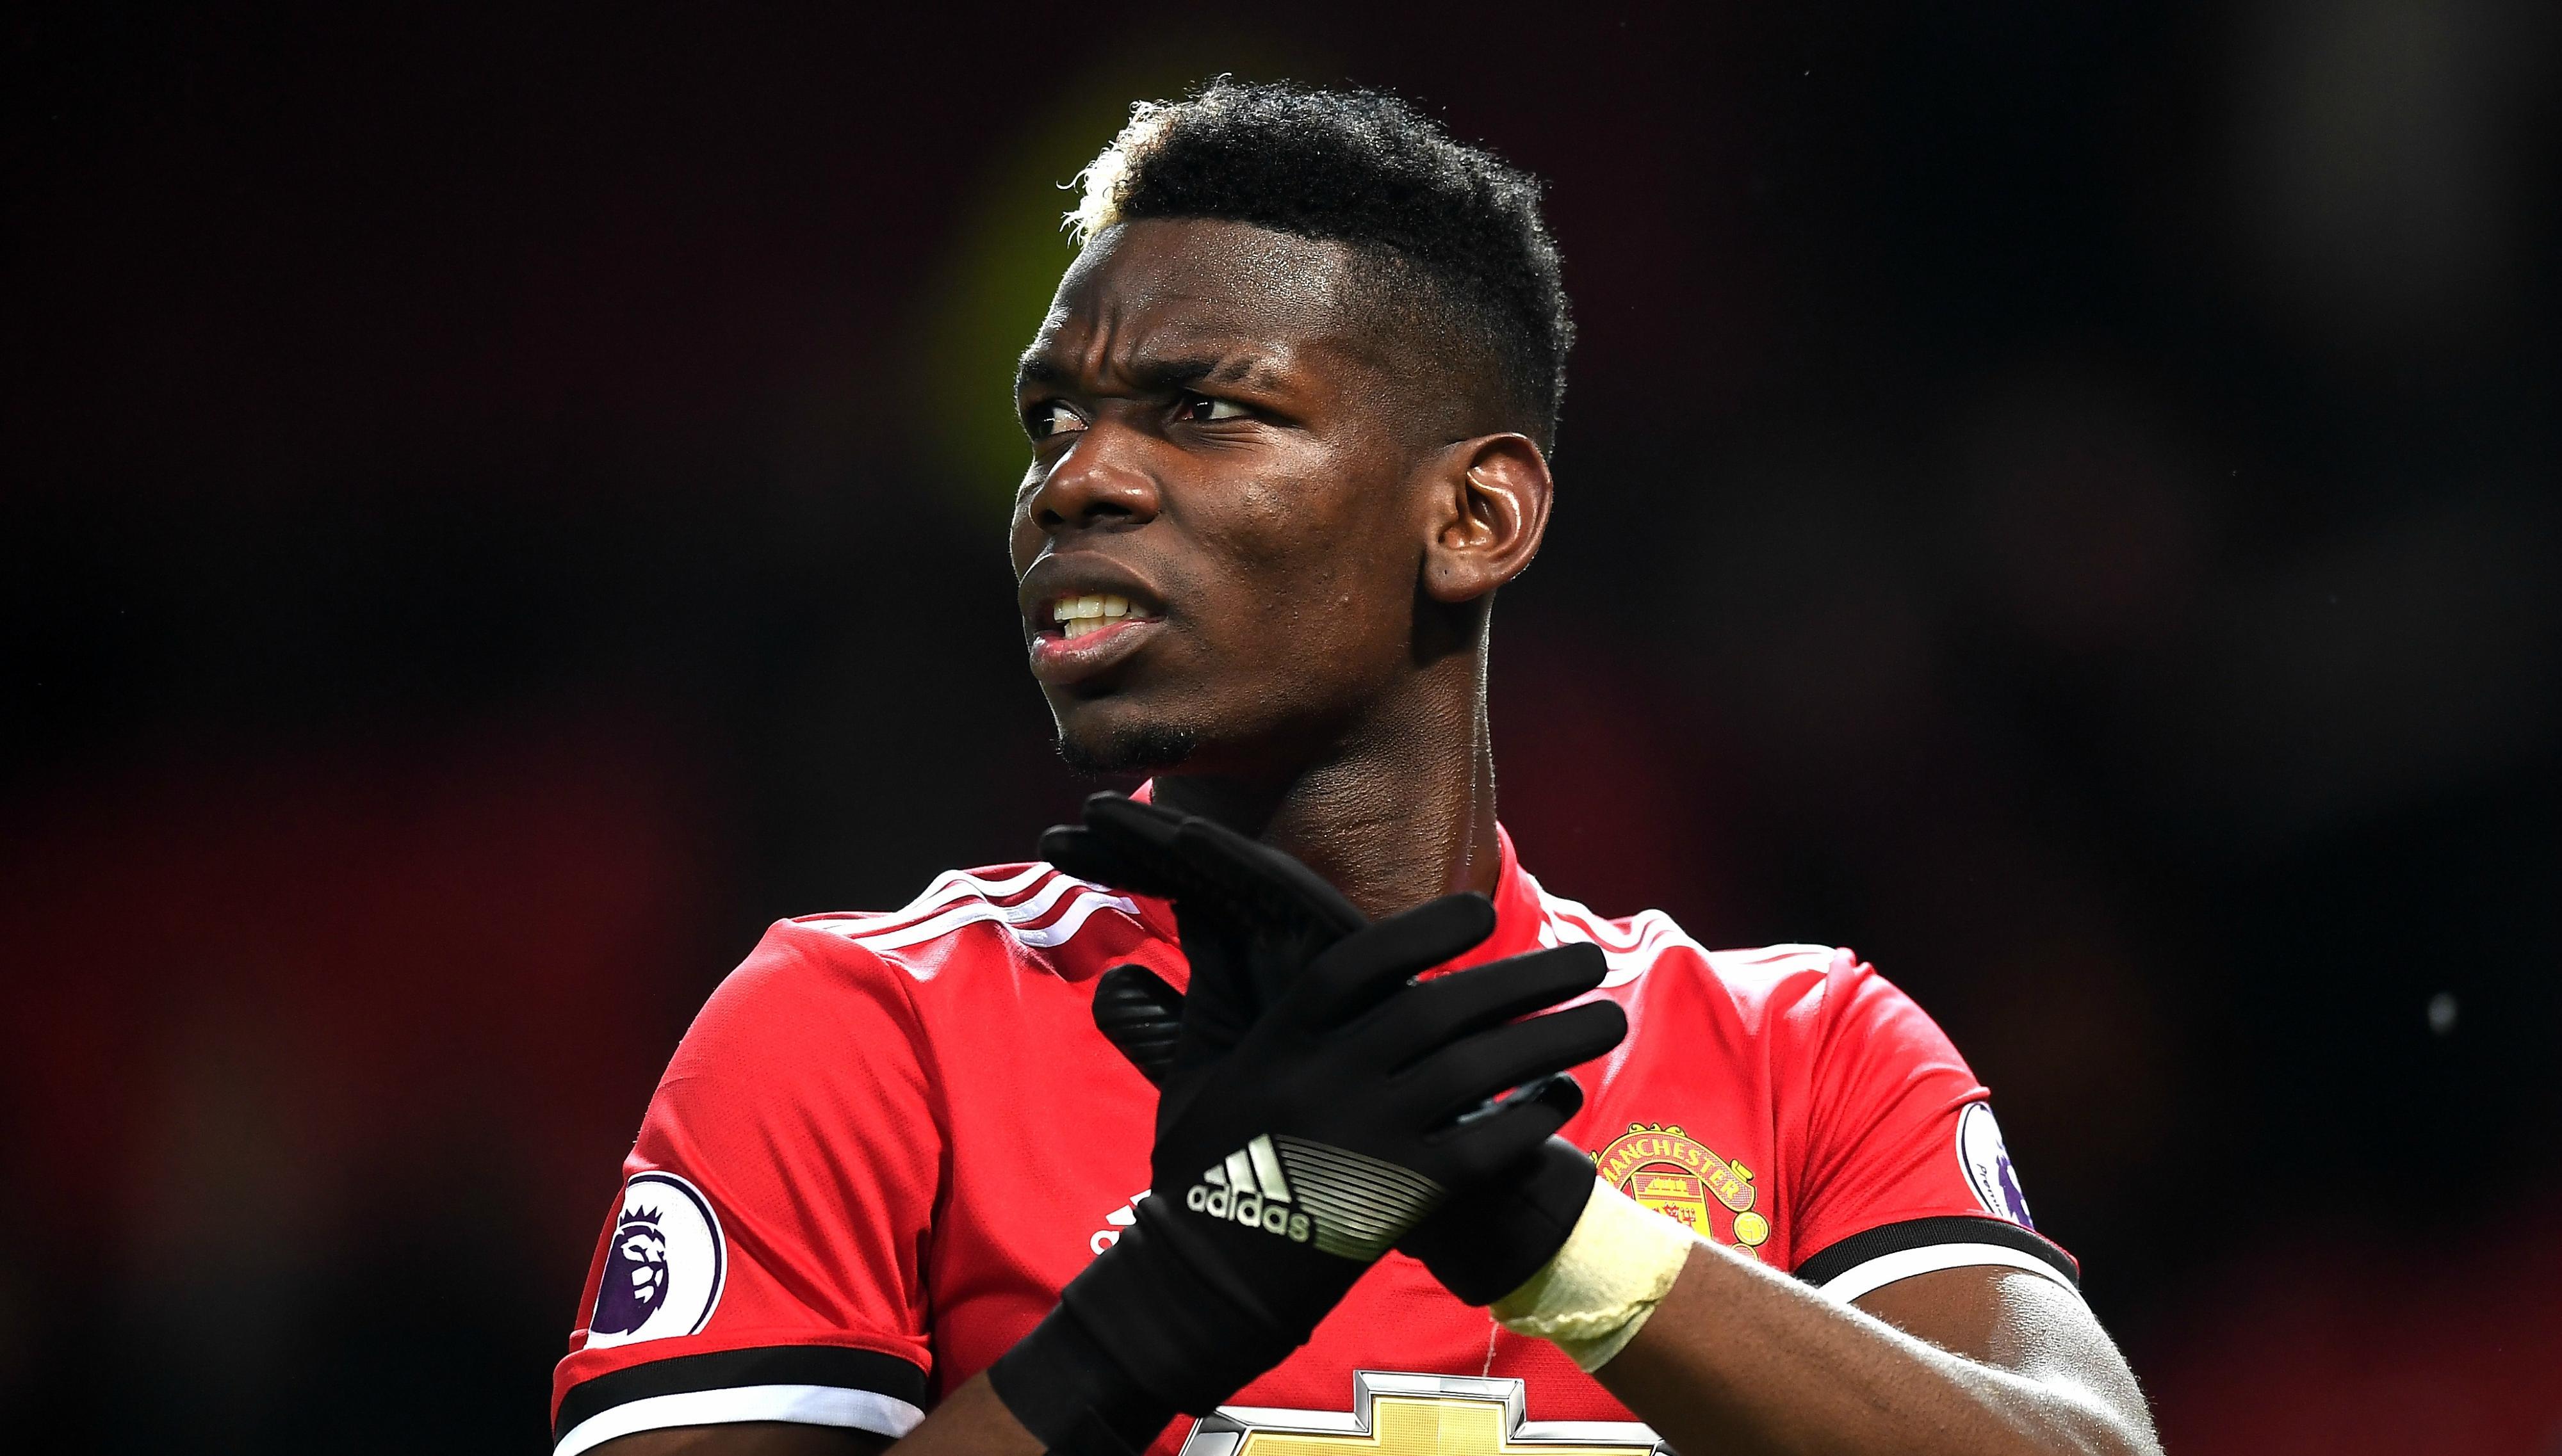 Man United's Paul Pogba wants his wages doubled to match Alexis